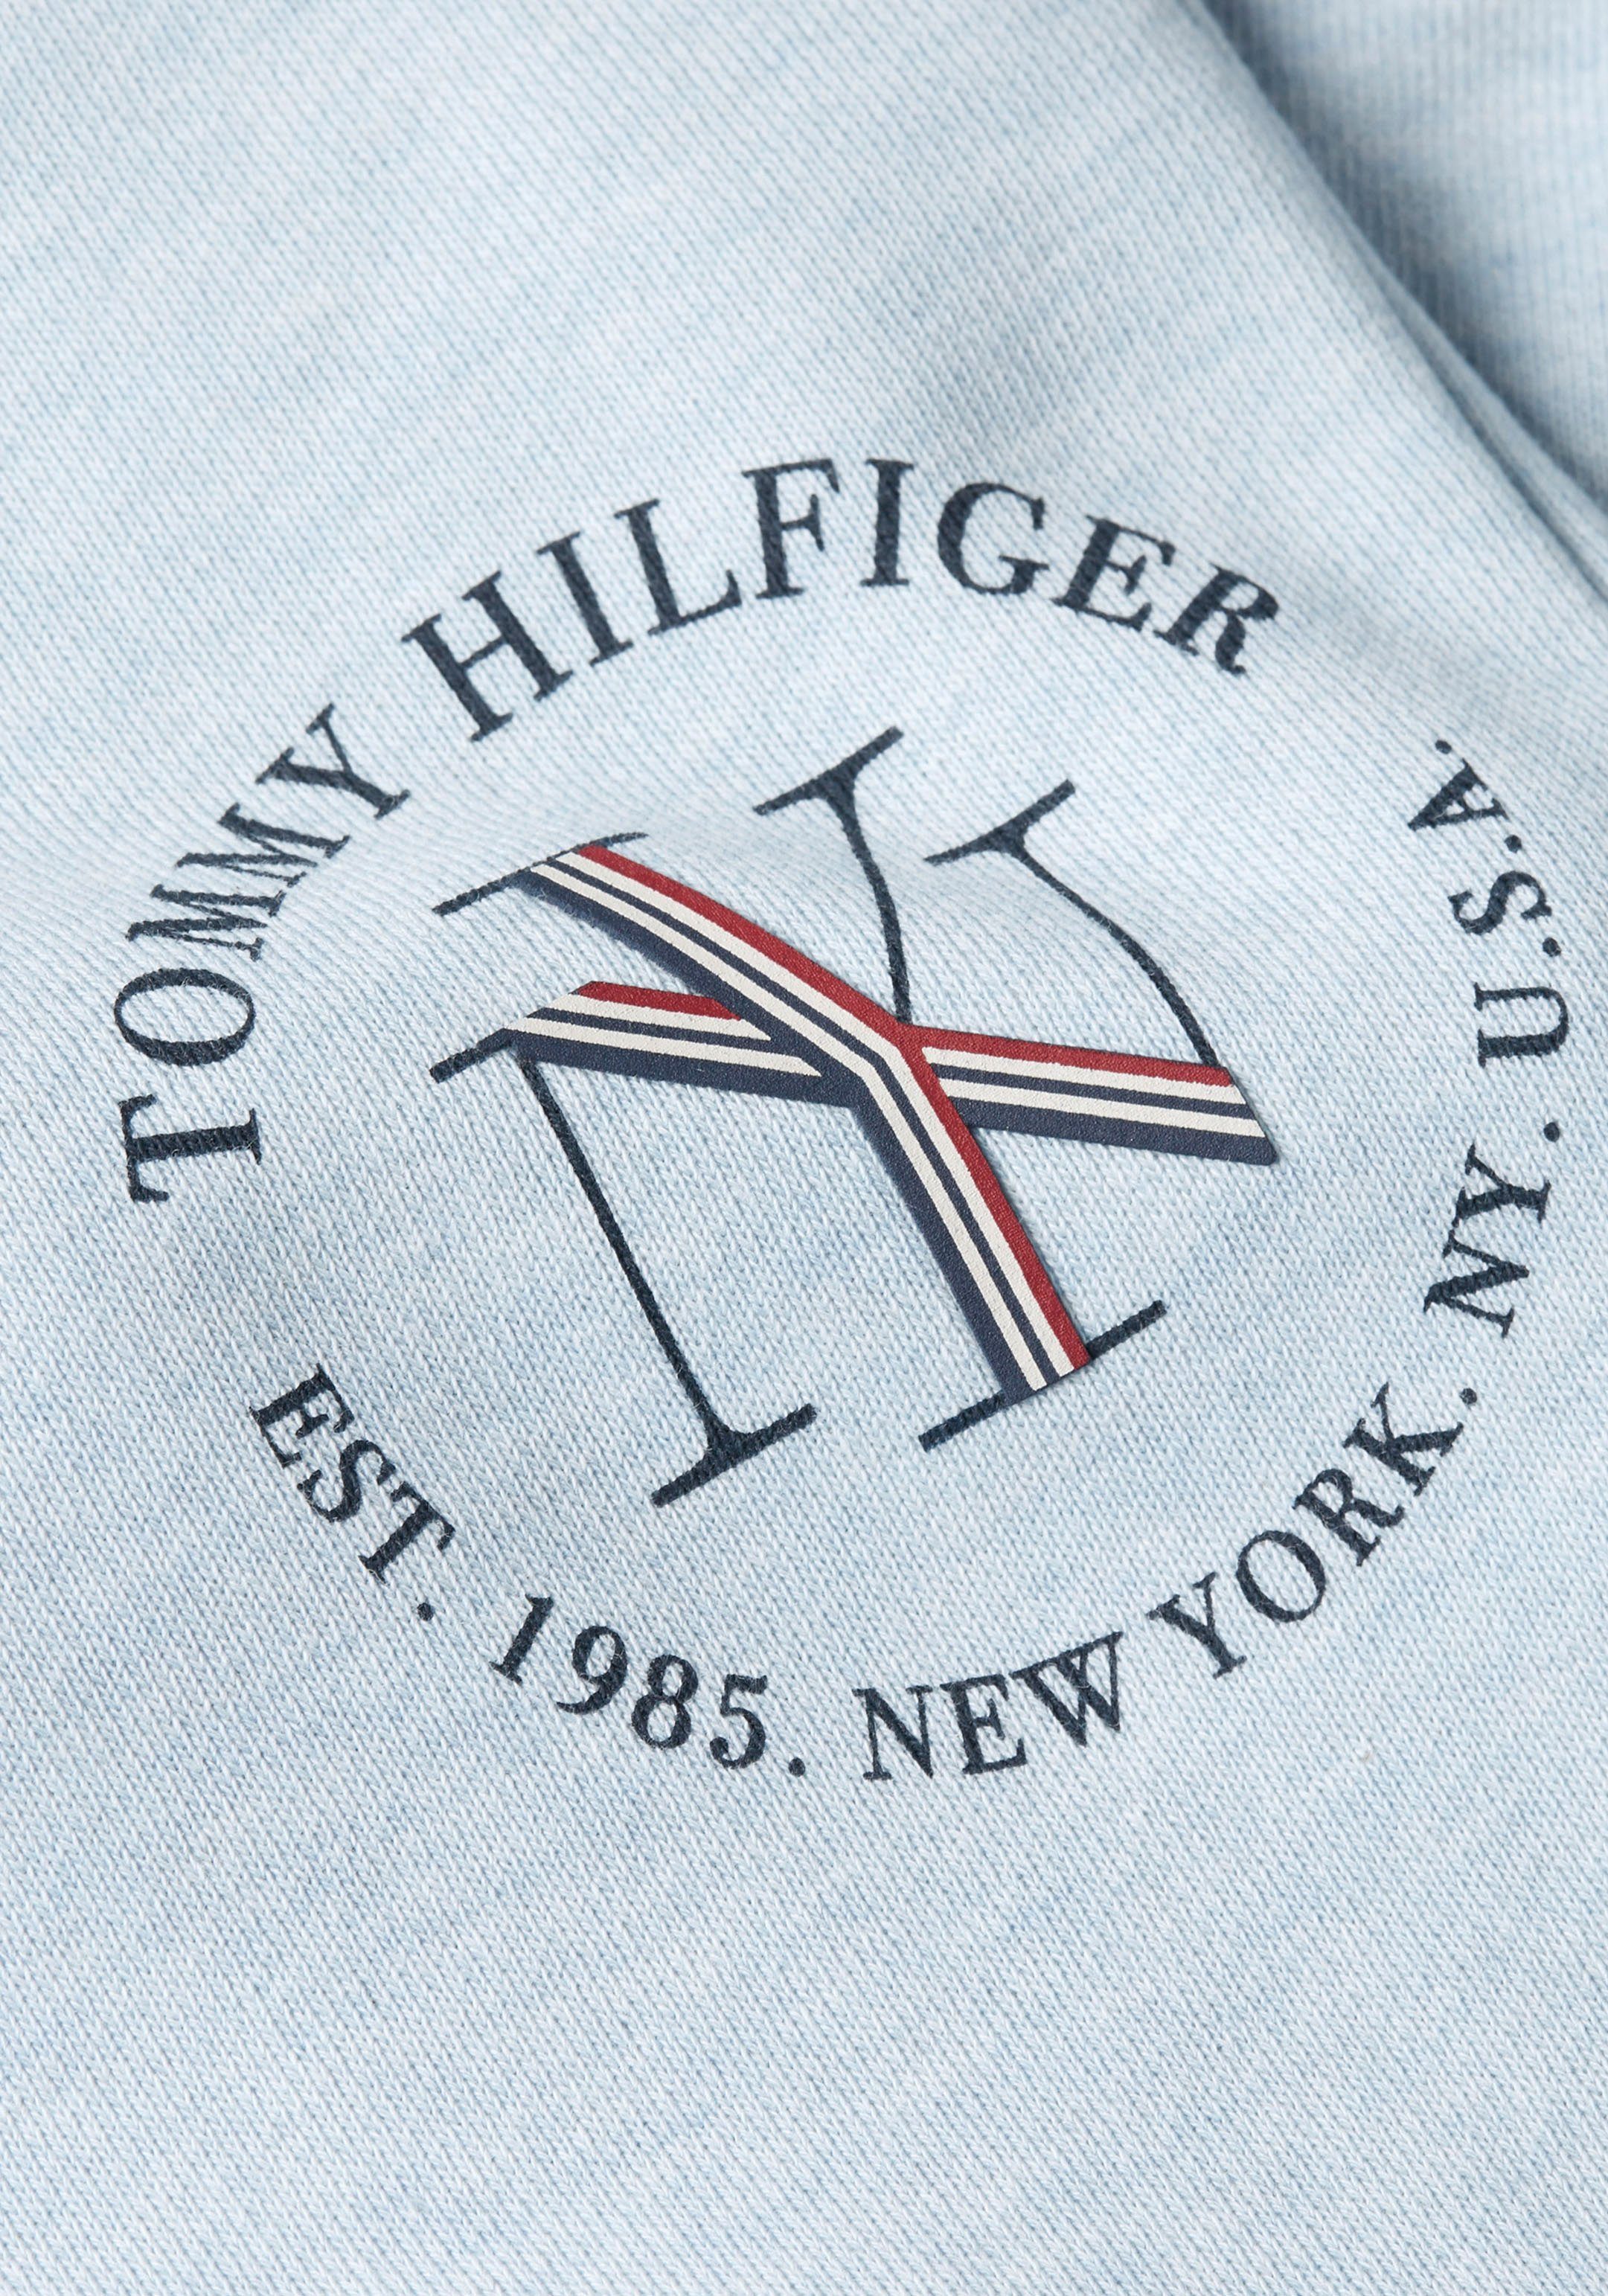 Tommy Hilfiger SWEATPANTS Breezy-Blue-Heather Hilfiger Tommy Sweatpants ROUNDALL Markenlabel mit TAPERED NYC